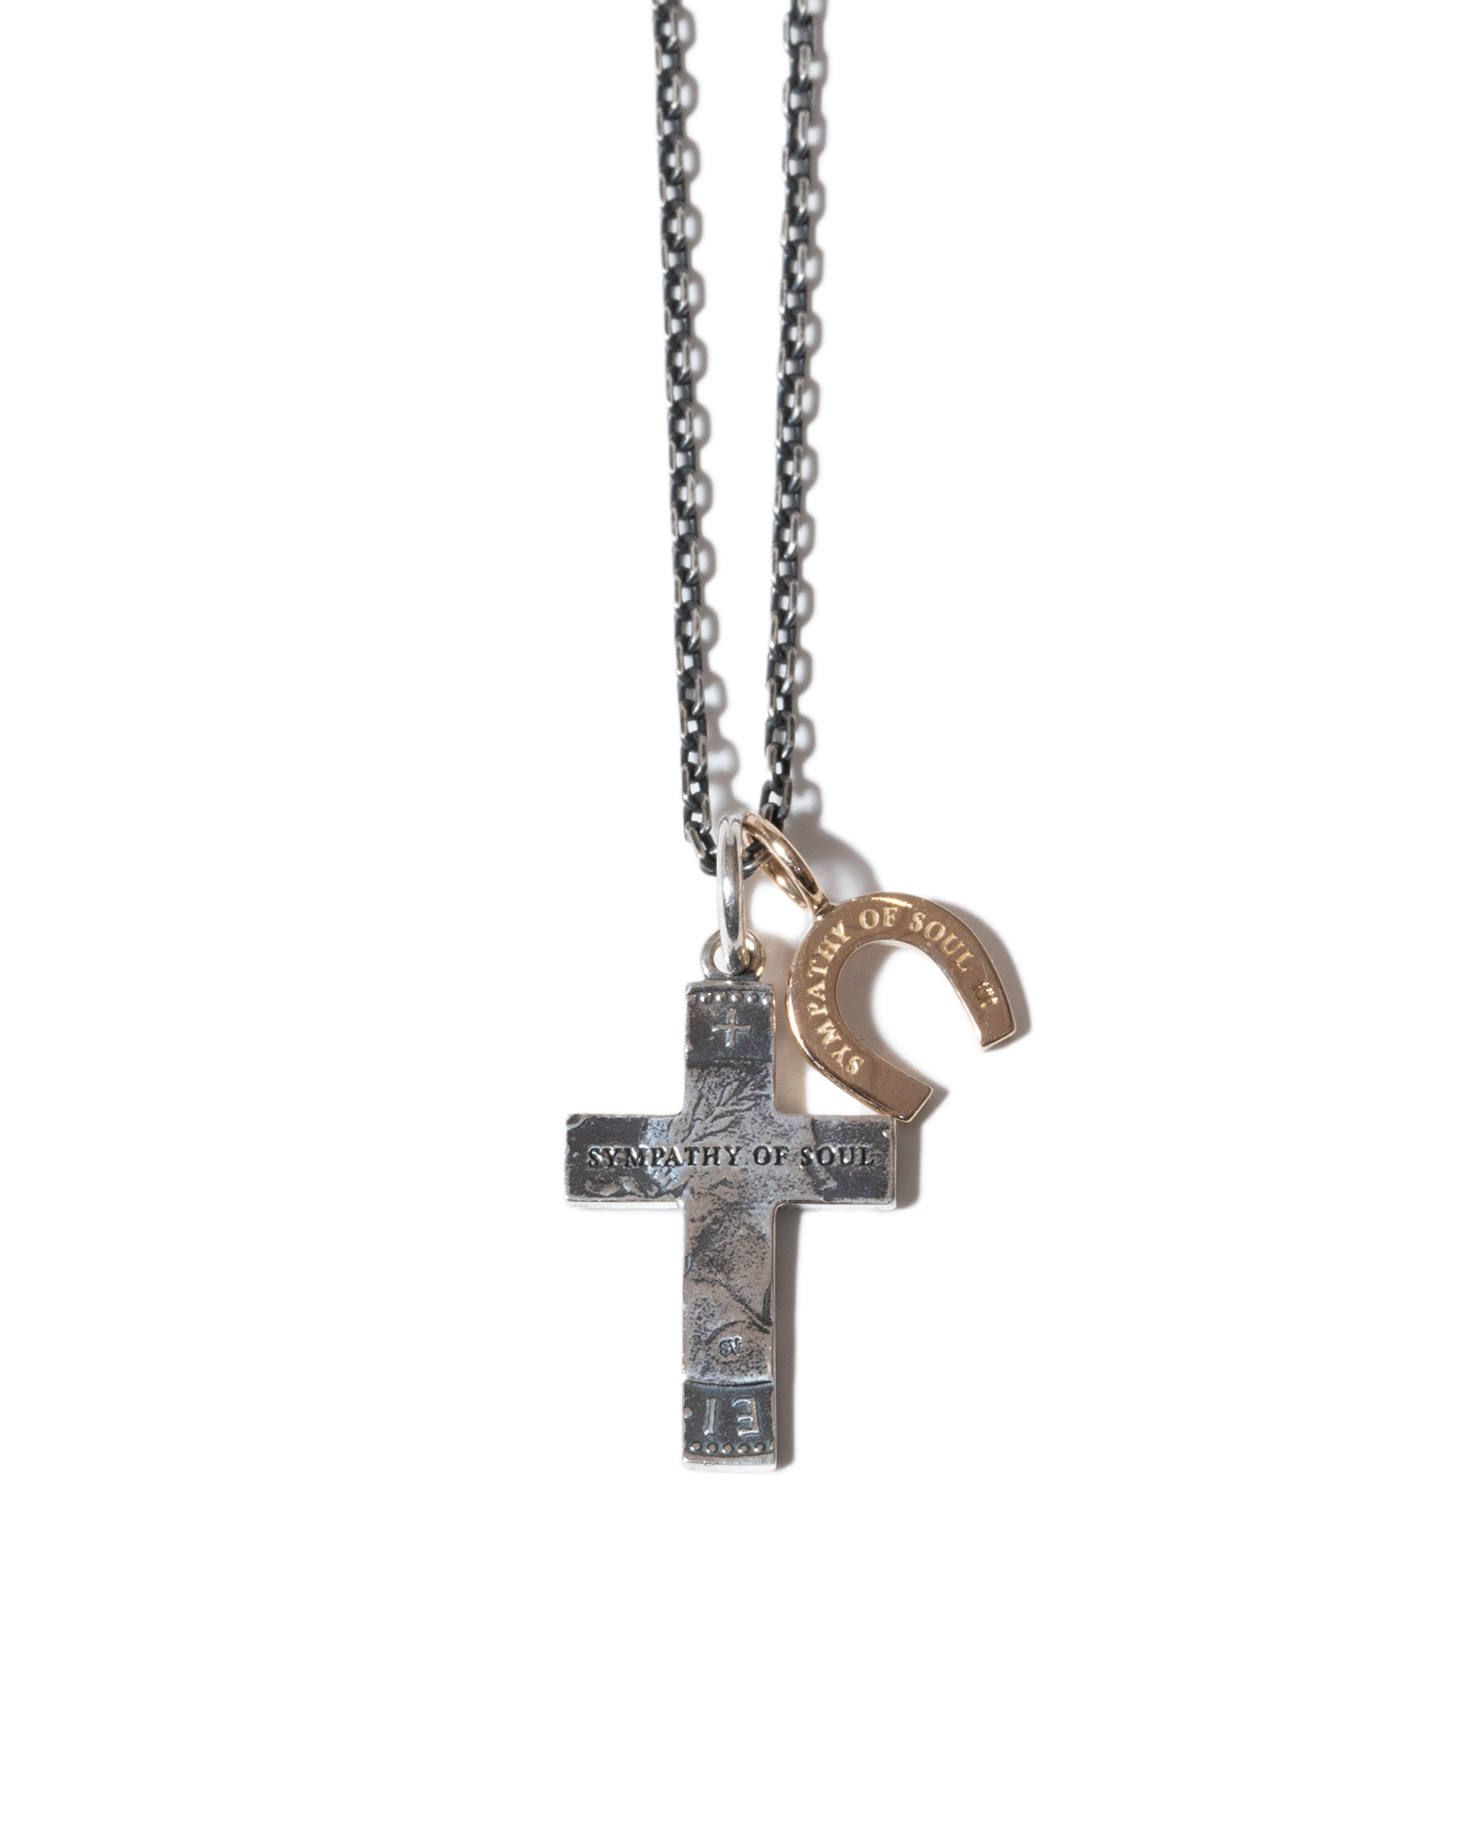 Sympathy of Soul - 1960's Sixpence Large Cross Necklace w/GOOD ...